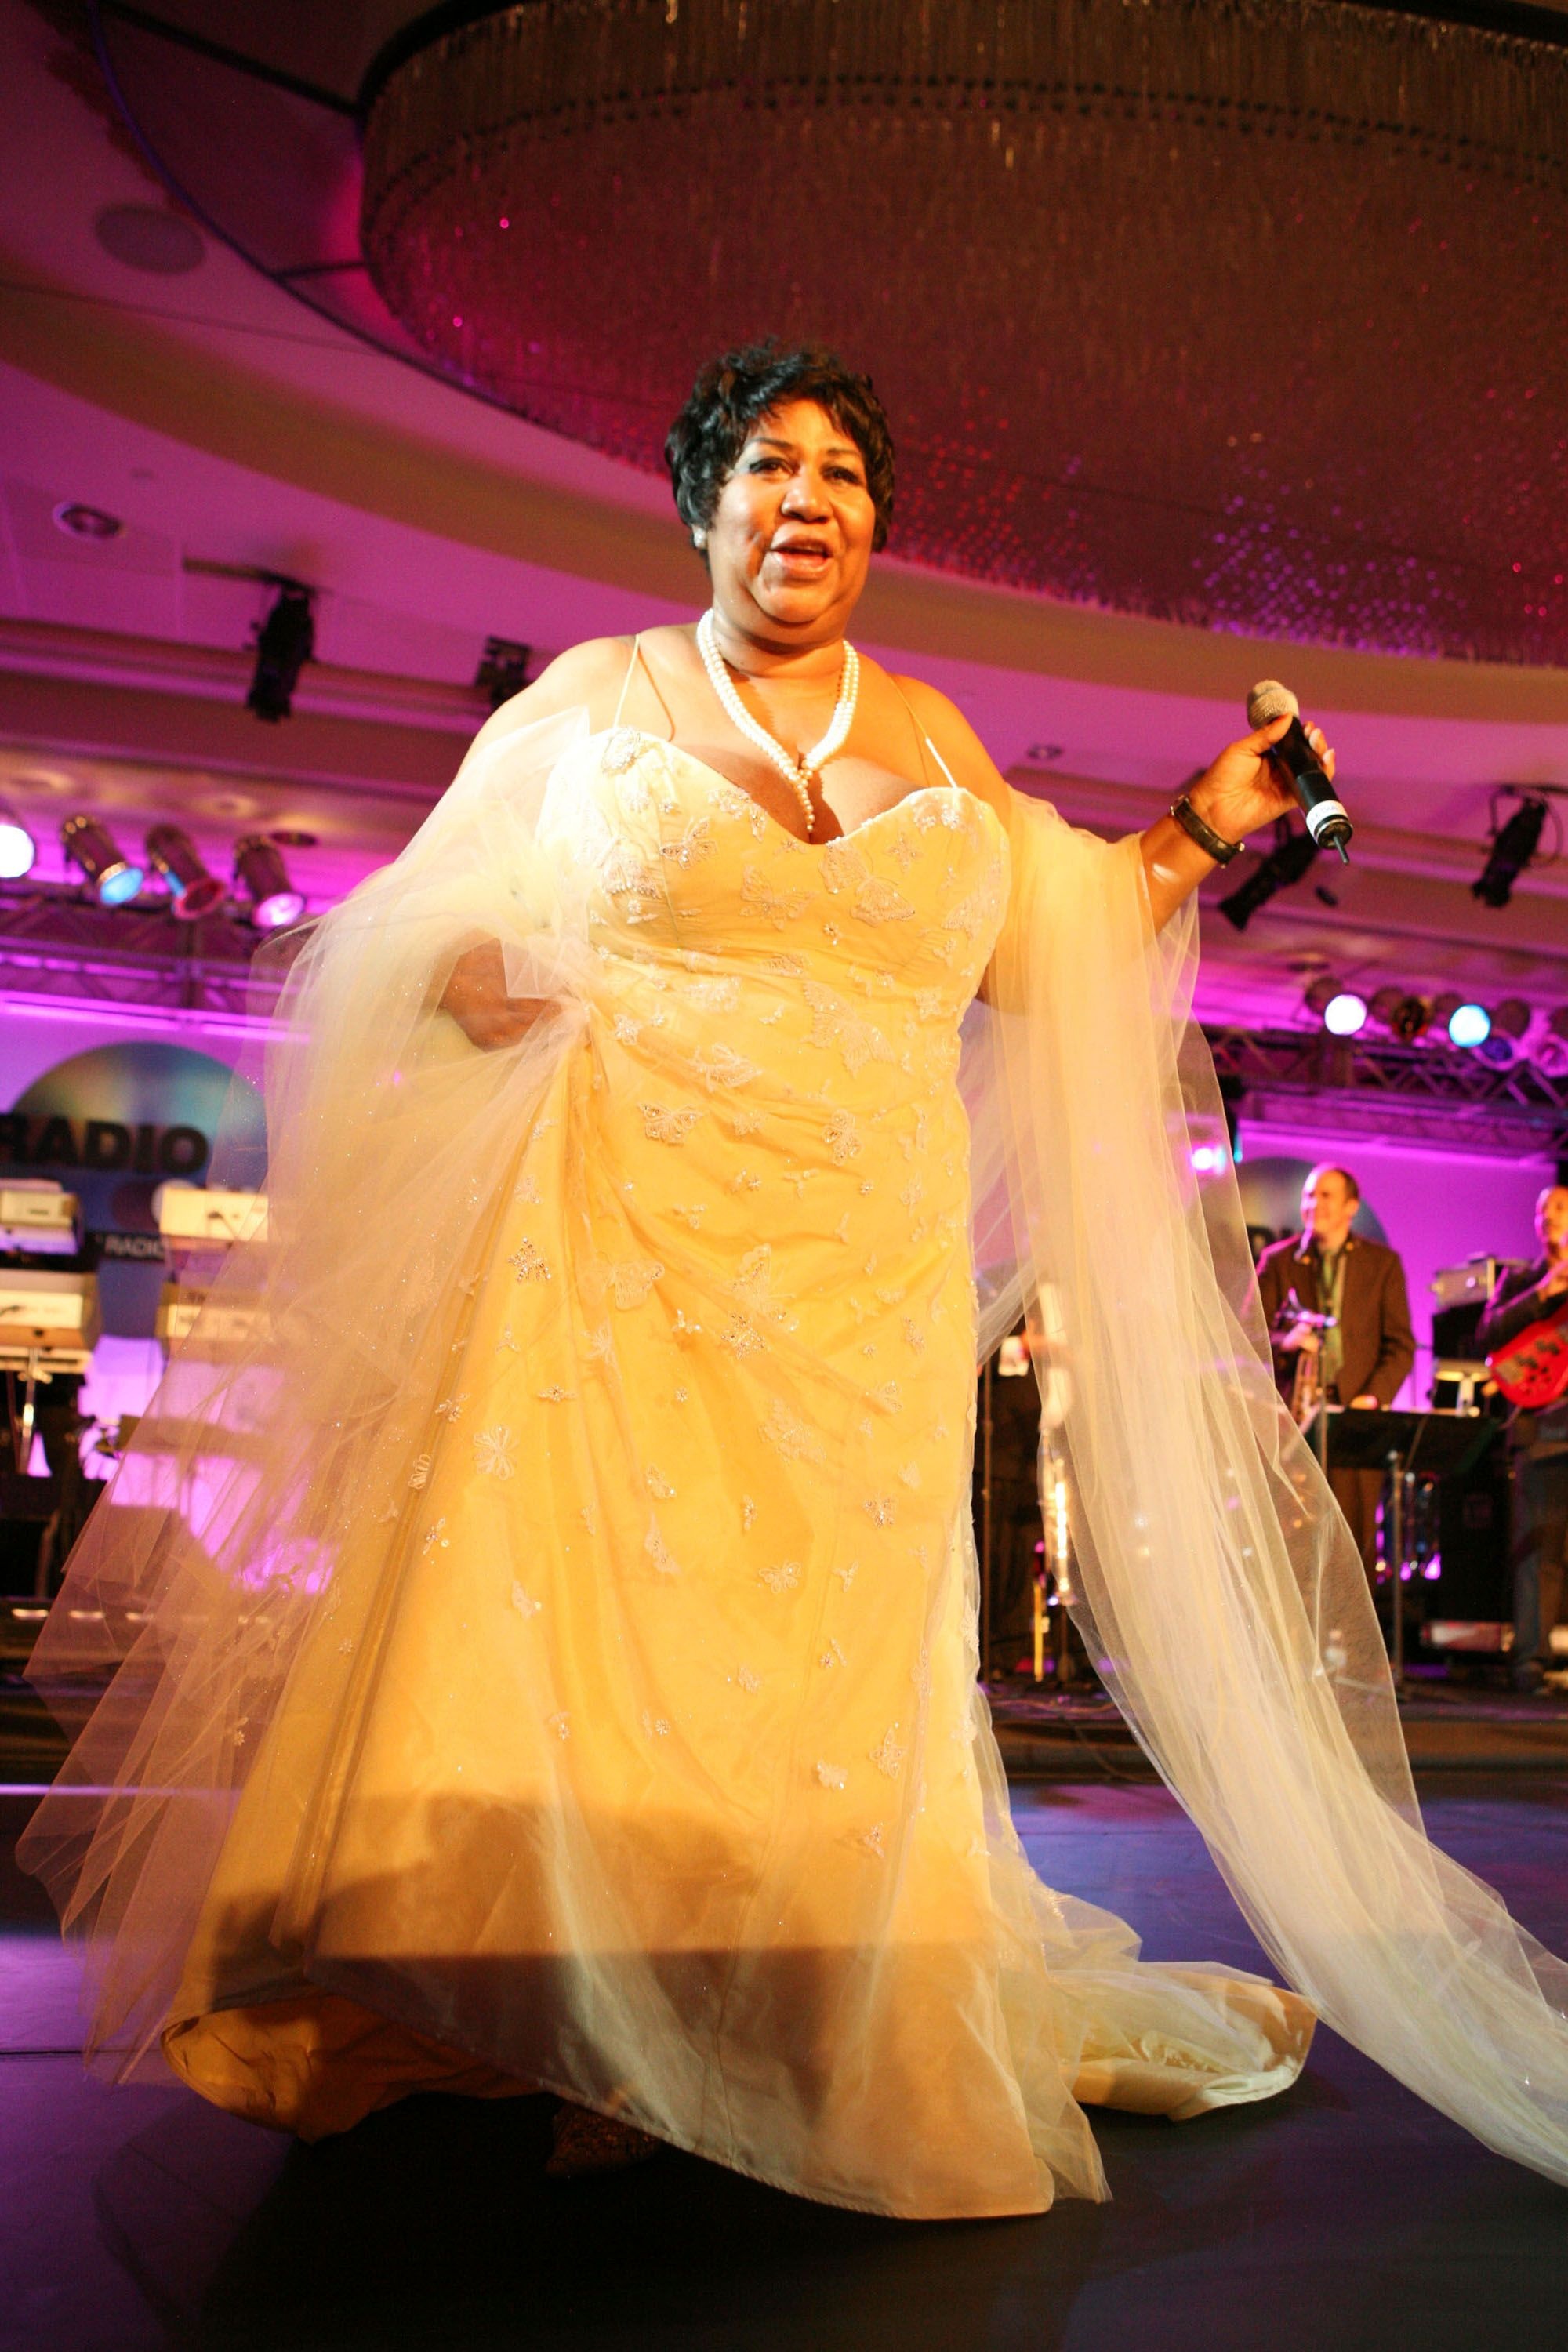 Aretha Franklin, Life in photos, Early years, Final performance, 2000x3000 HD Handy